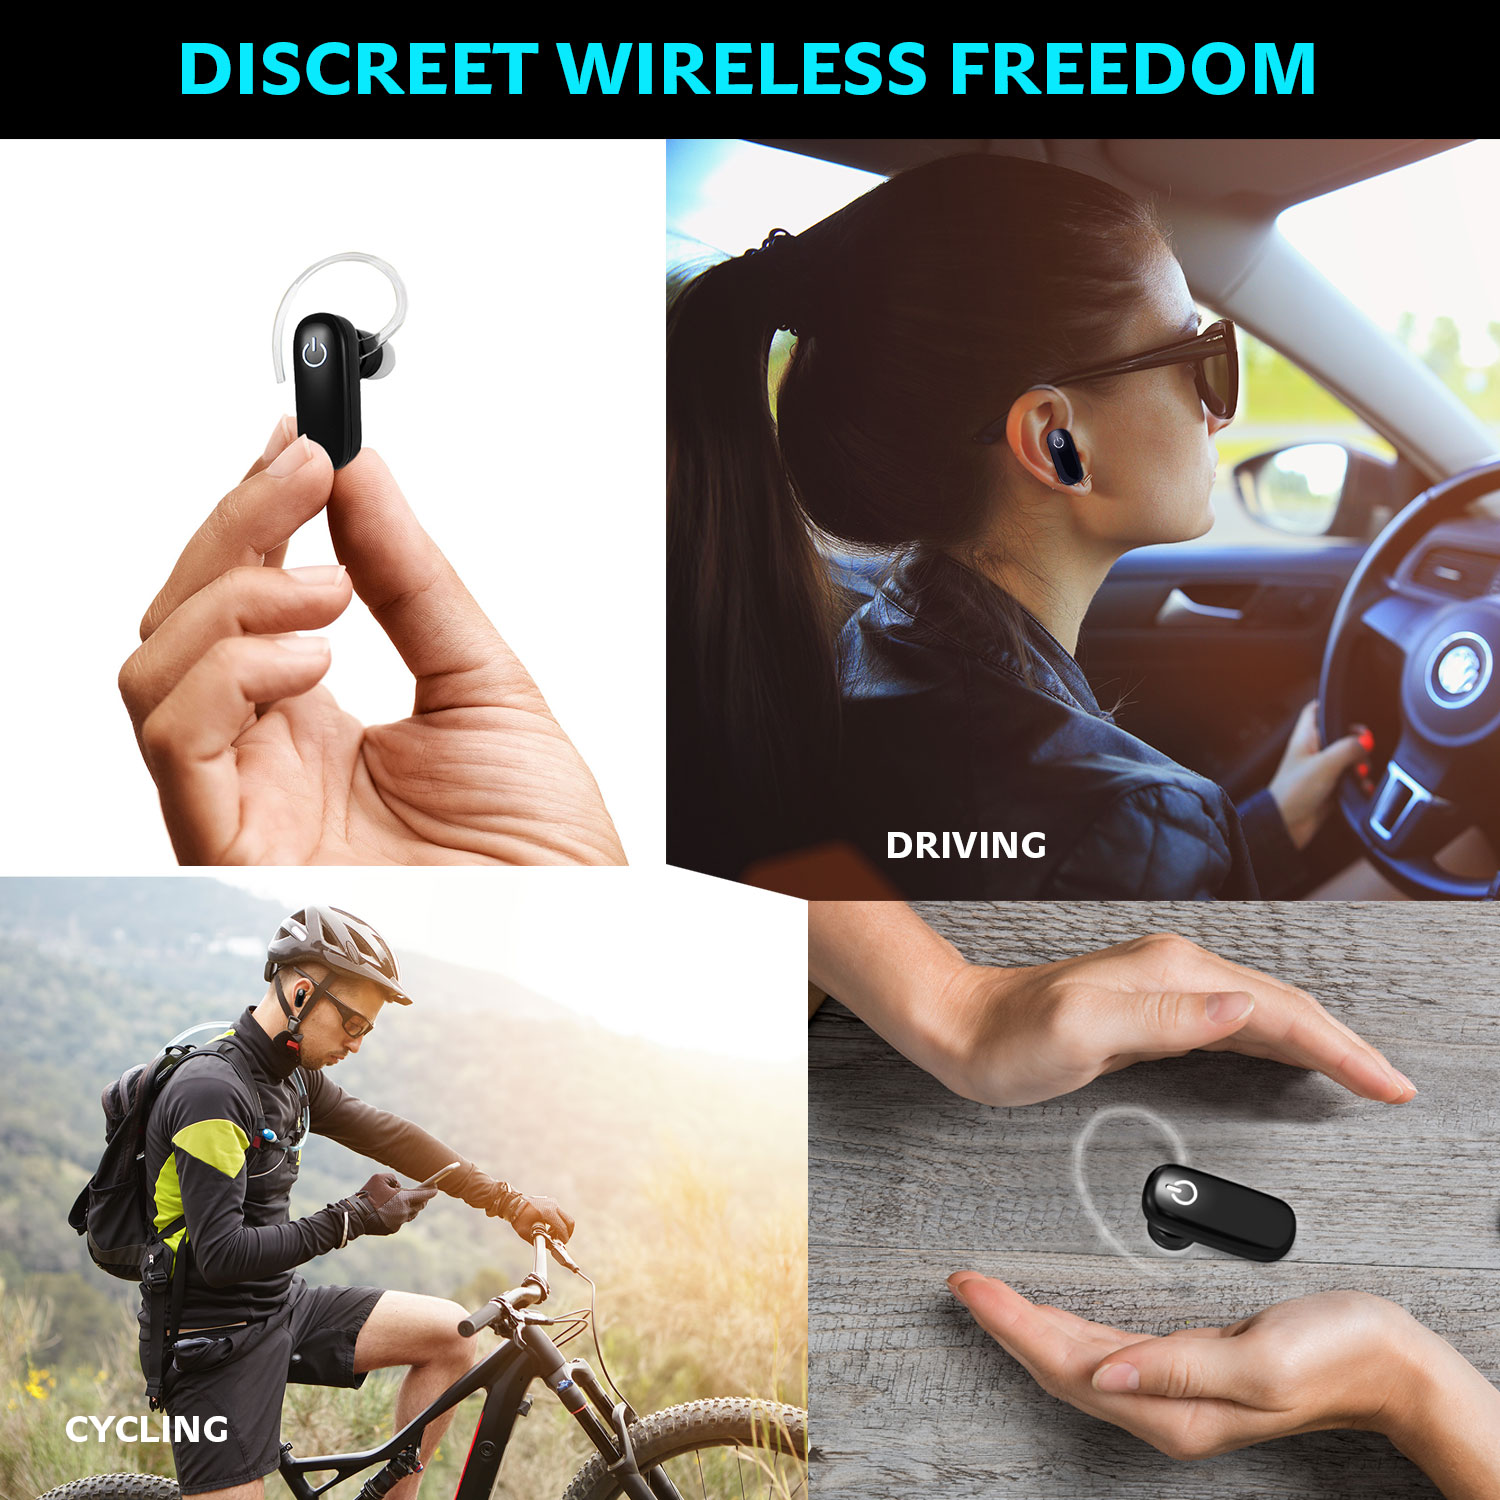 Small Vida-IT BH119B Mono In-Ear Wireless Bluetooth Handsfree Headset One Button Design Earphone Mini Earbud headphone with Built-in Microphone perfect in-car use or cycling compatible with / for iphone samsung mobile phone smartphone 